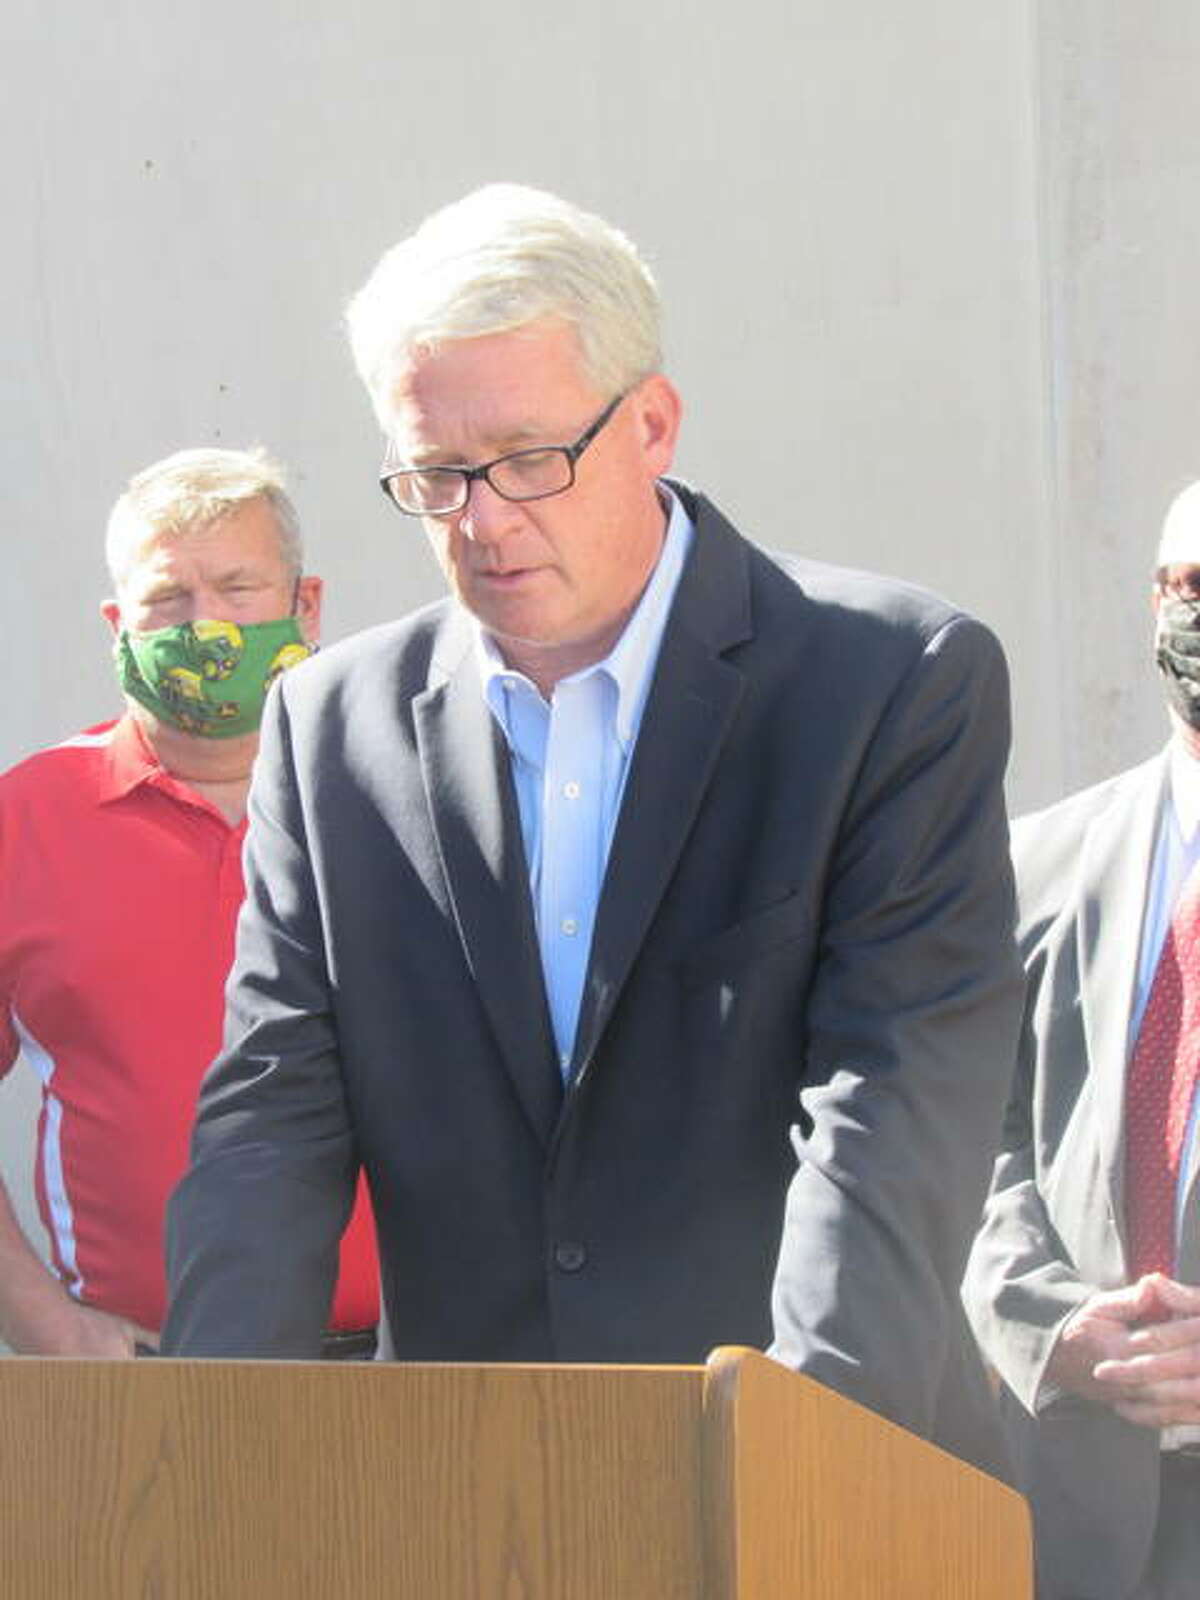 Illinois House Republican Leader Jim Durkin speaks Thursday outside the Madison County Courthouse in Edwardsville about proposed ethics and property tax reforms. He was joined by Madison County Chairman Kurt Prenzler and two Riverbend Republican legislative candidates, Amy Elik and Lisa Ciampoli.